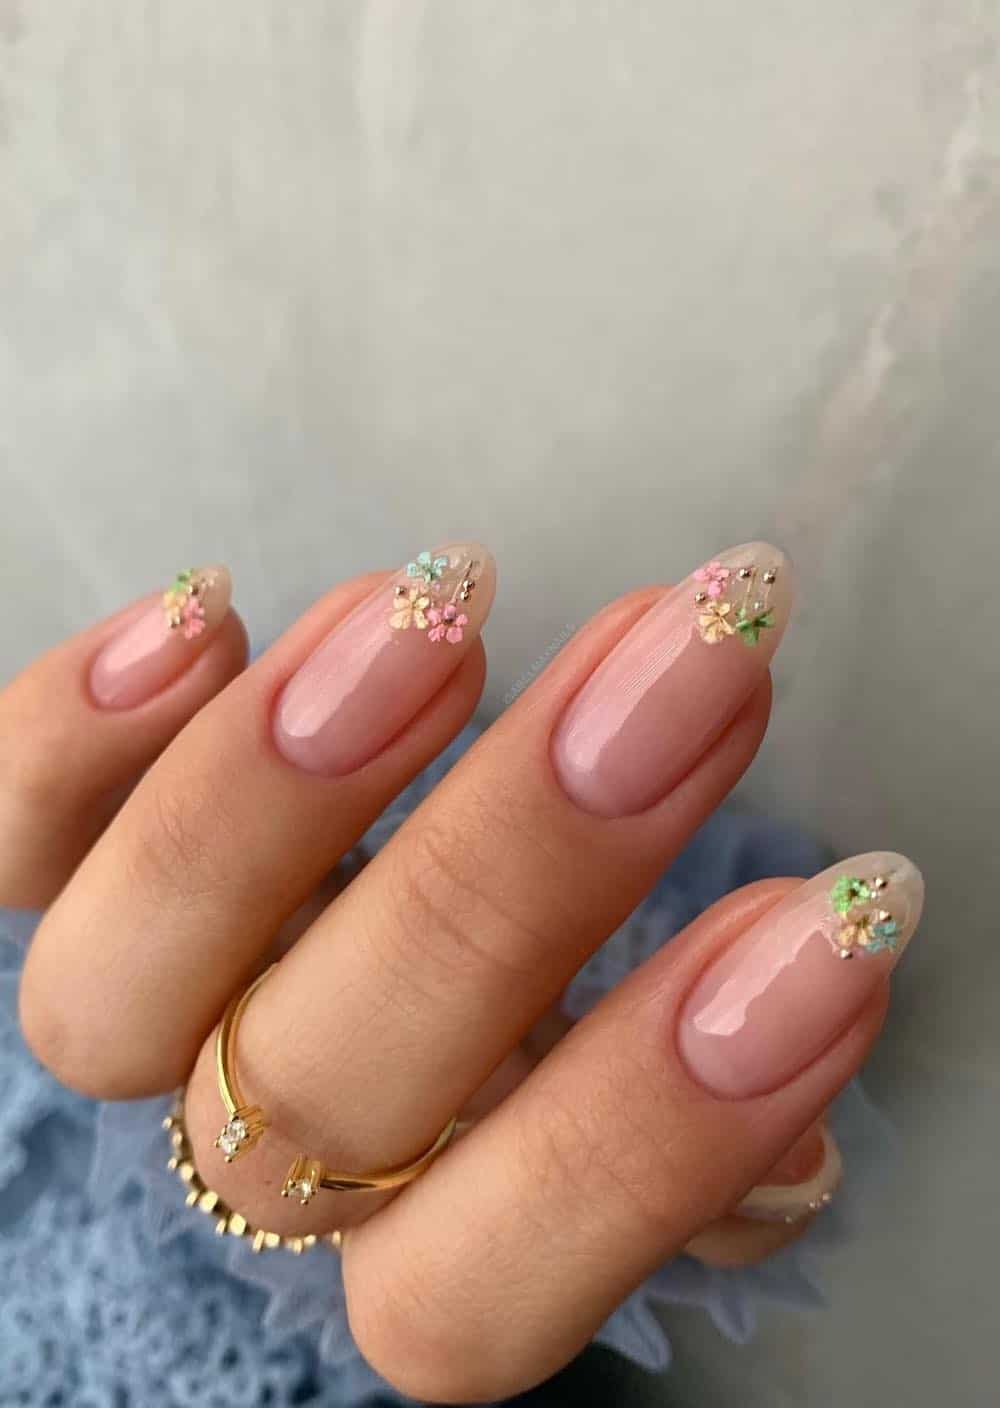 A hand with short glossy, nude almond nails with dainty pastel flowers and gold dot accents